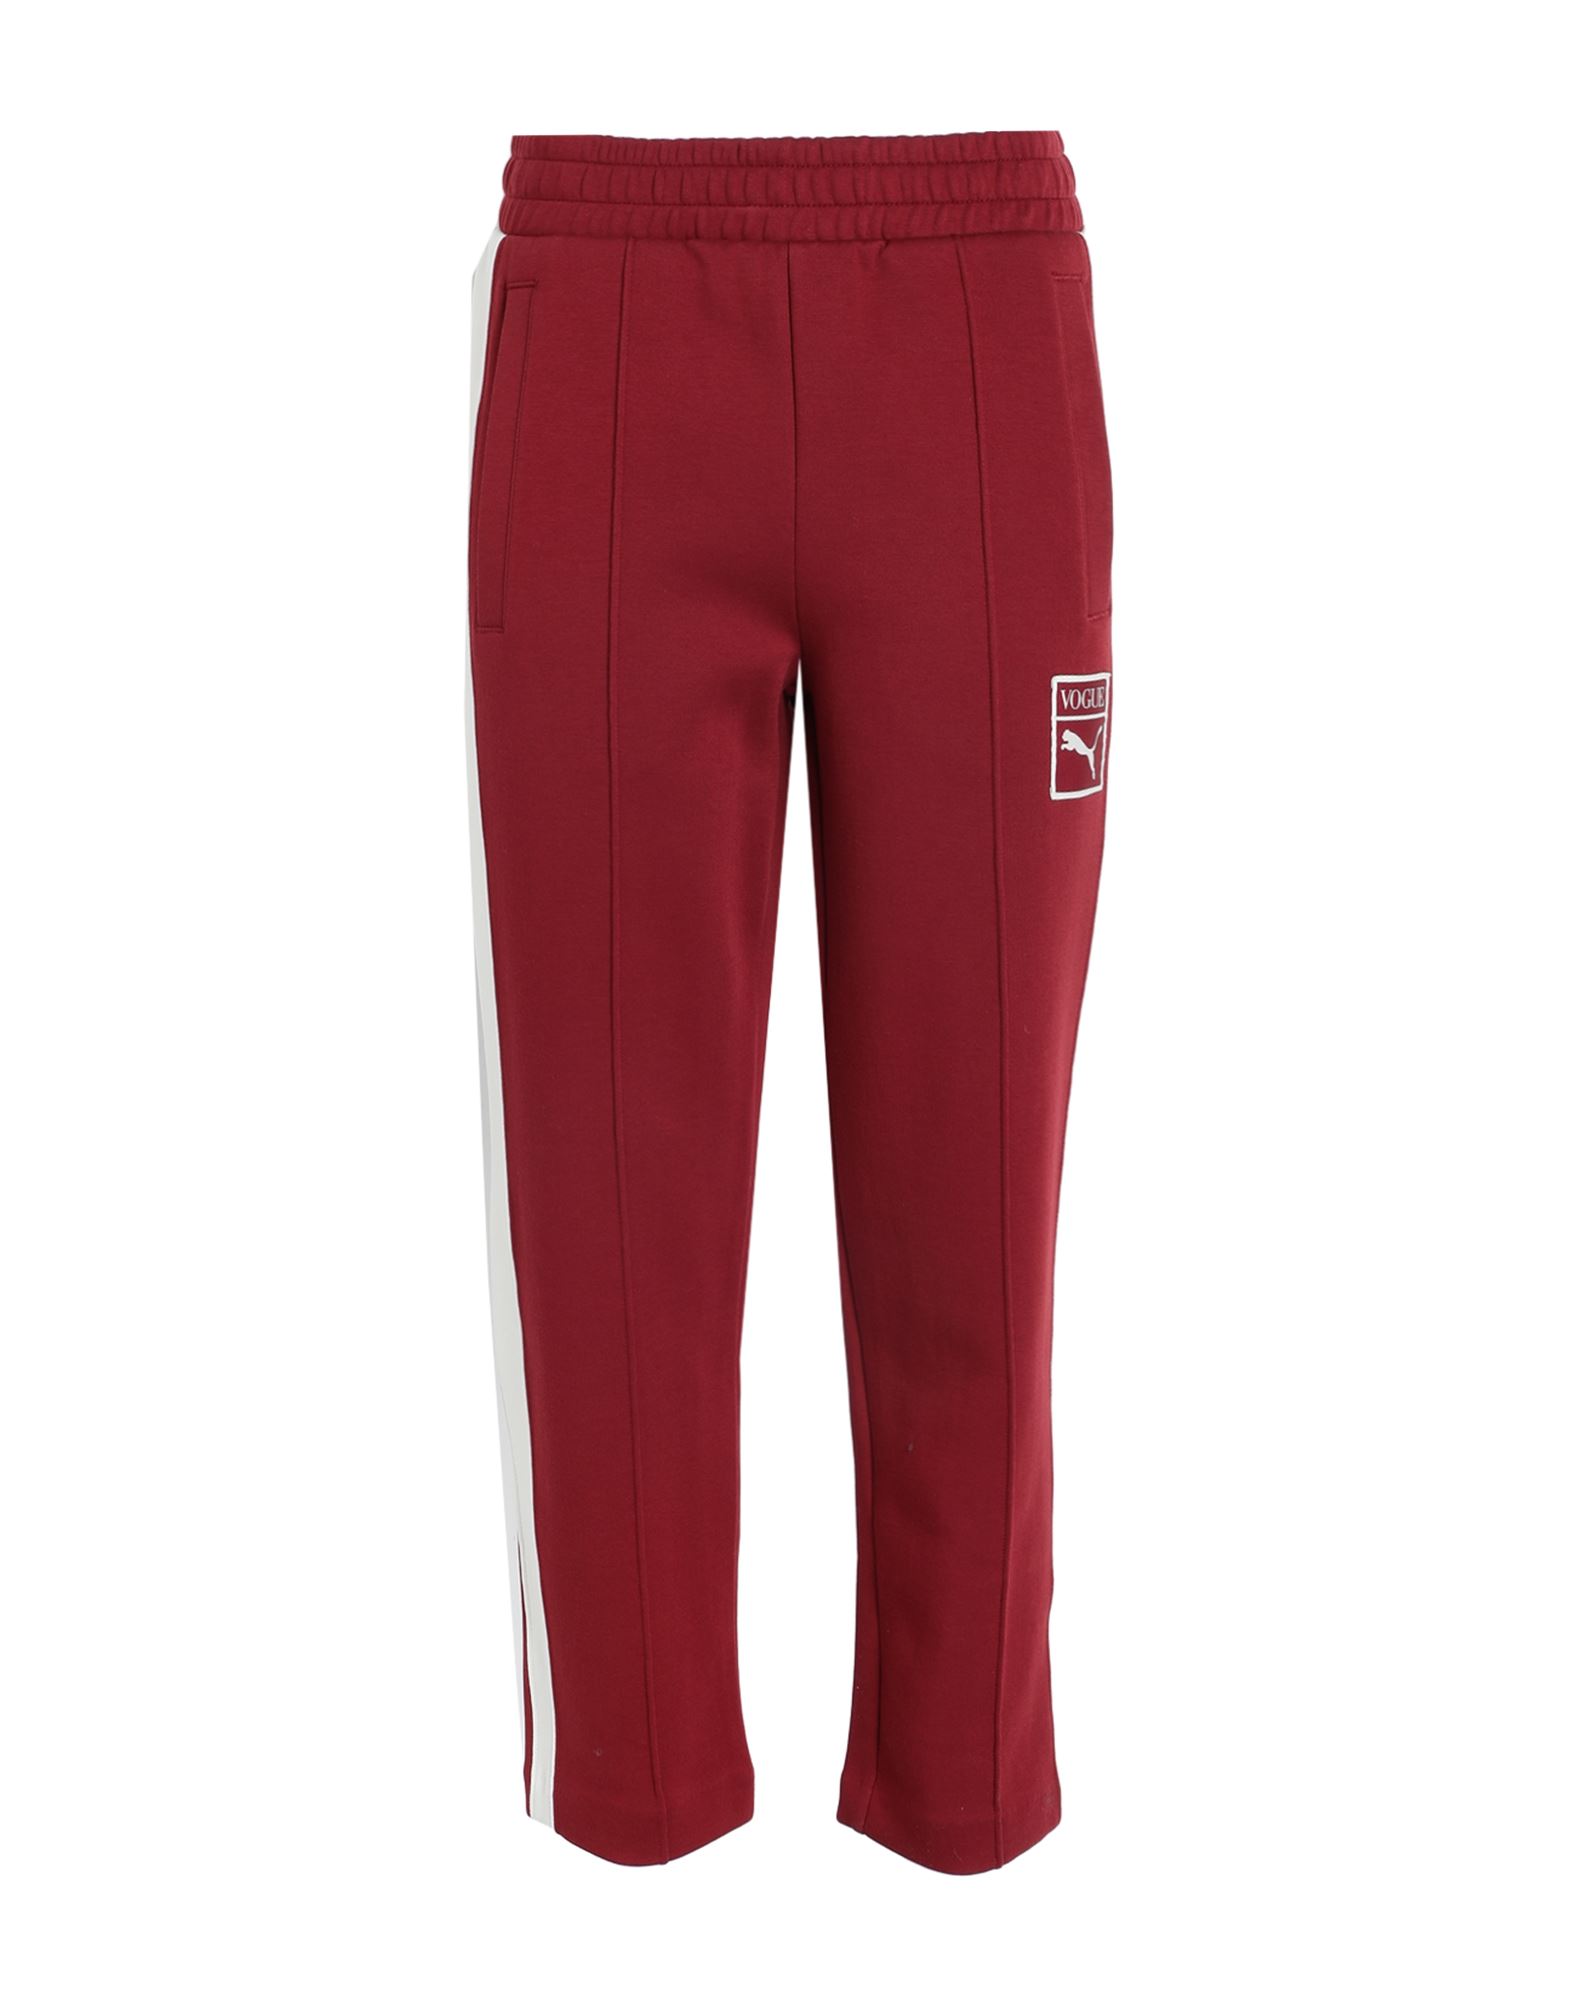 Puma X Vogue Pants In Red